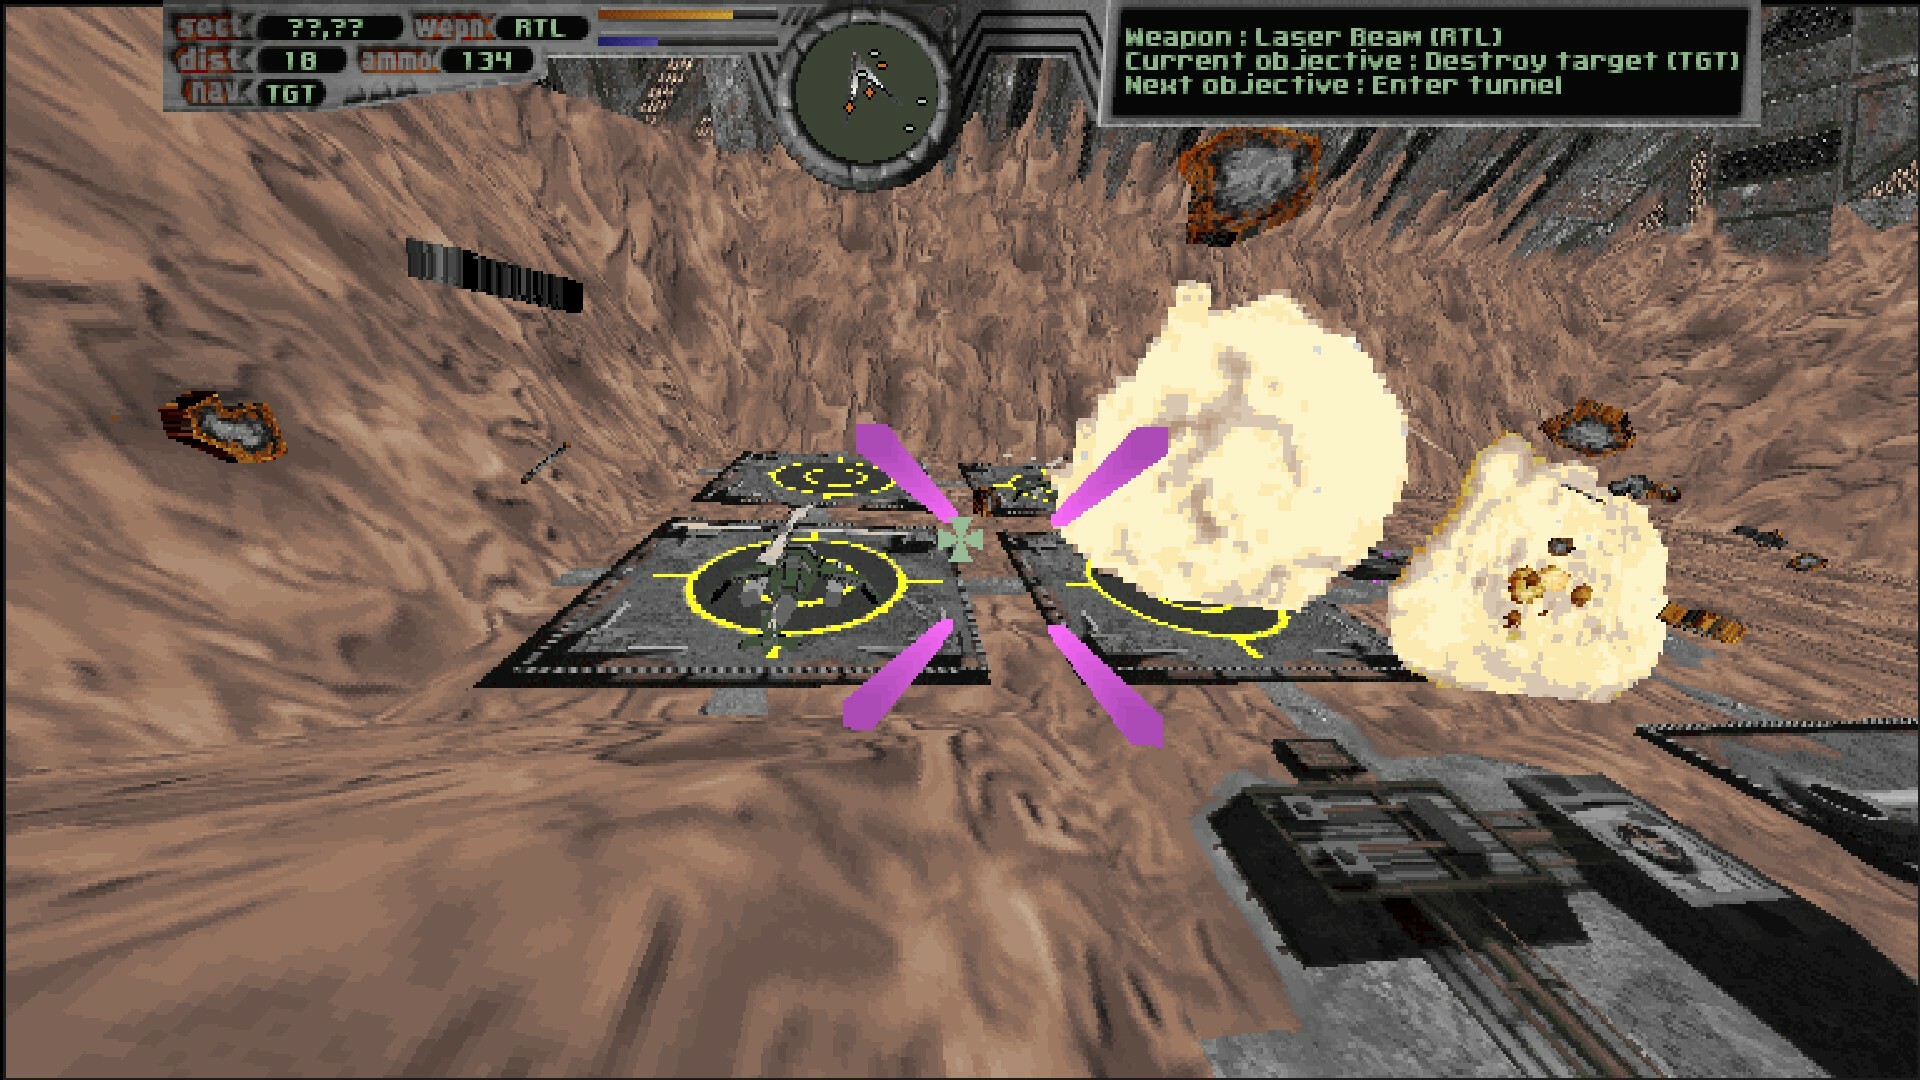 Terminal Velocity: Boosted Edition - screenshot 4